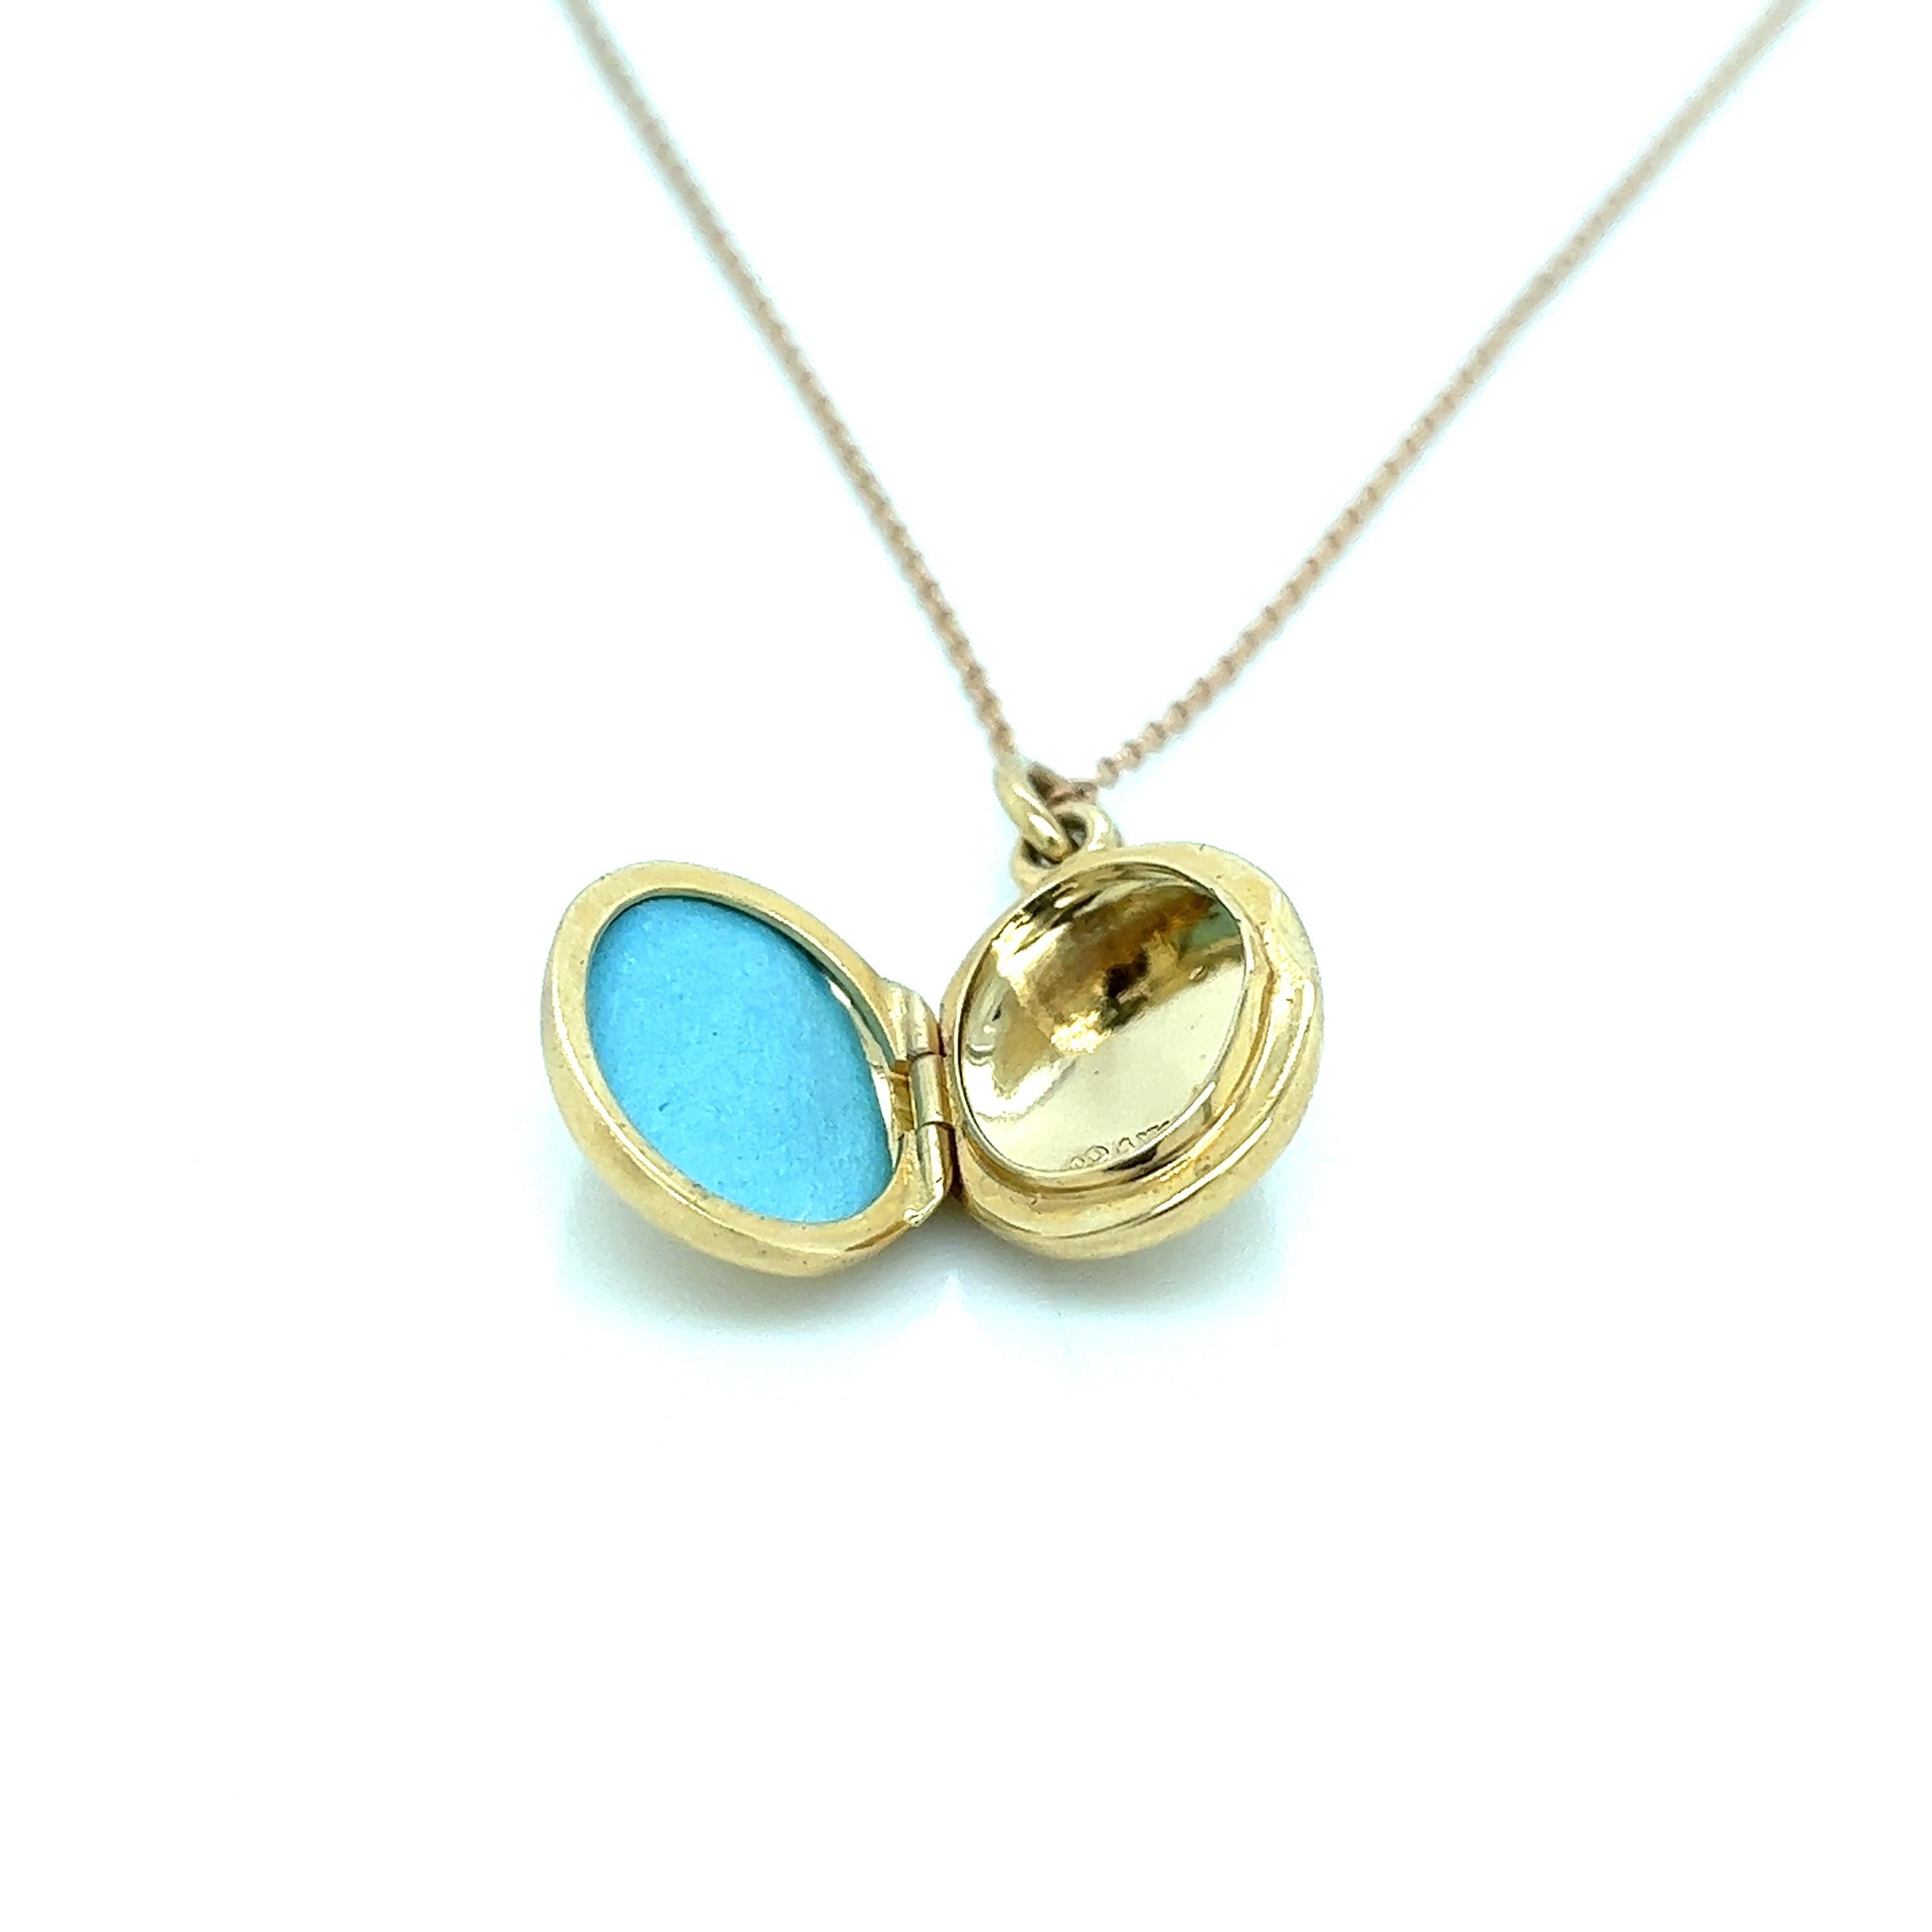 Tiffany & Co 14k gold vintage oval locket pendant, suspended on a T & Co 18k gold chain. Necklace is 16